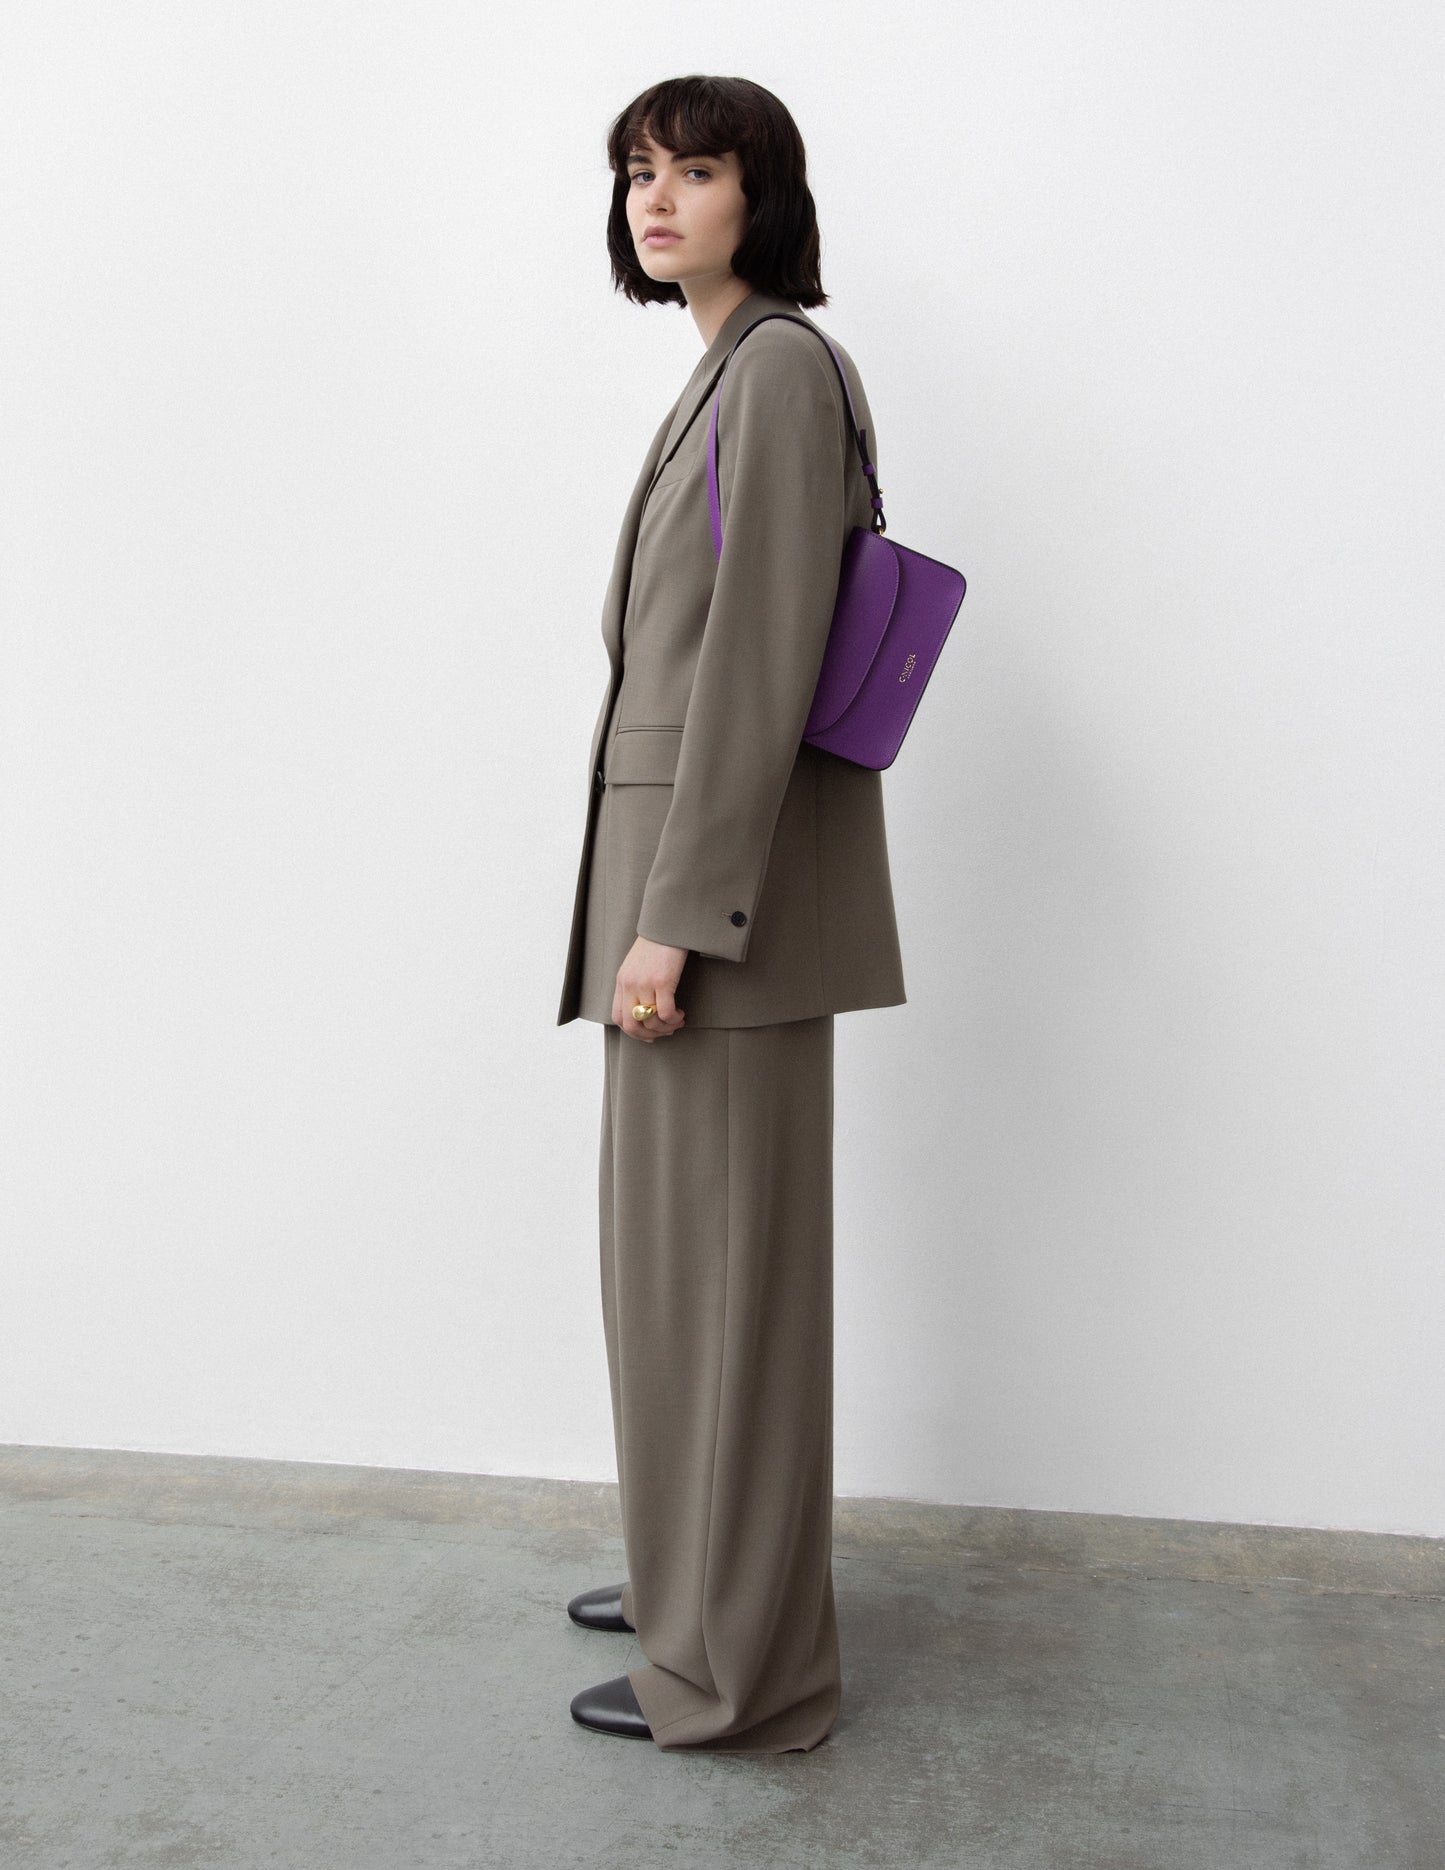 CNicol Purple Leather Bag worn by Model wearing Brown Suit